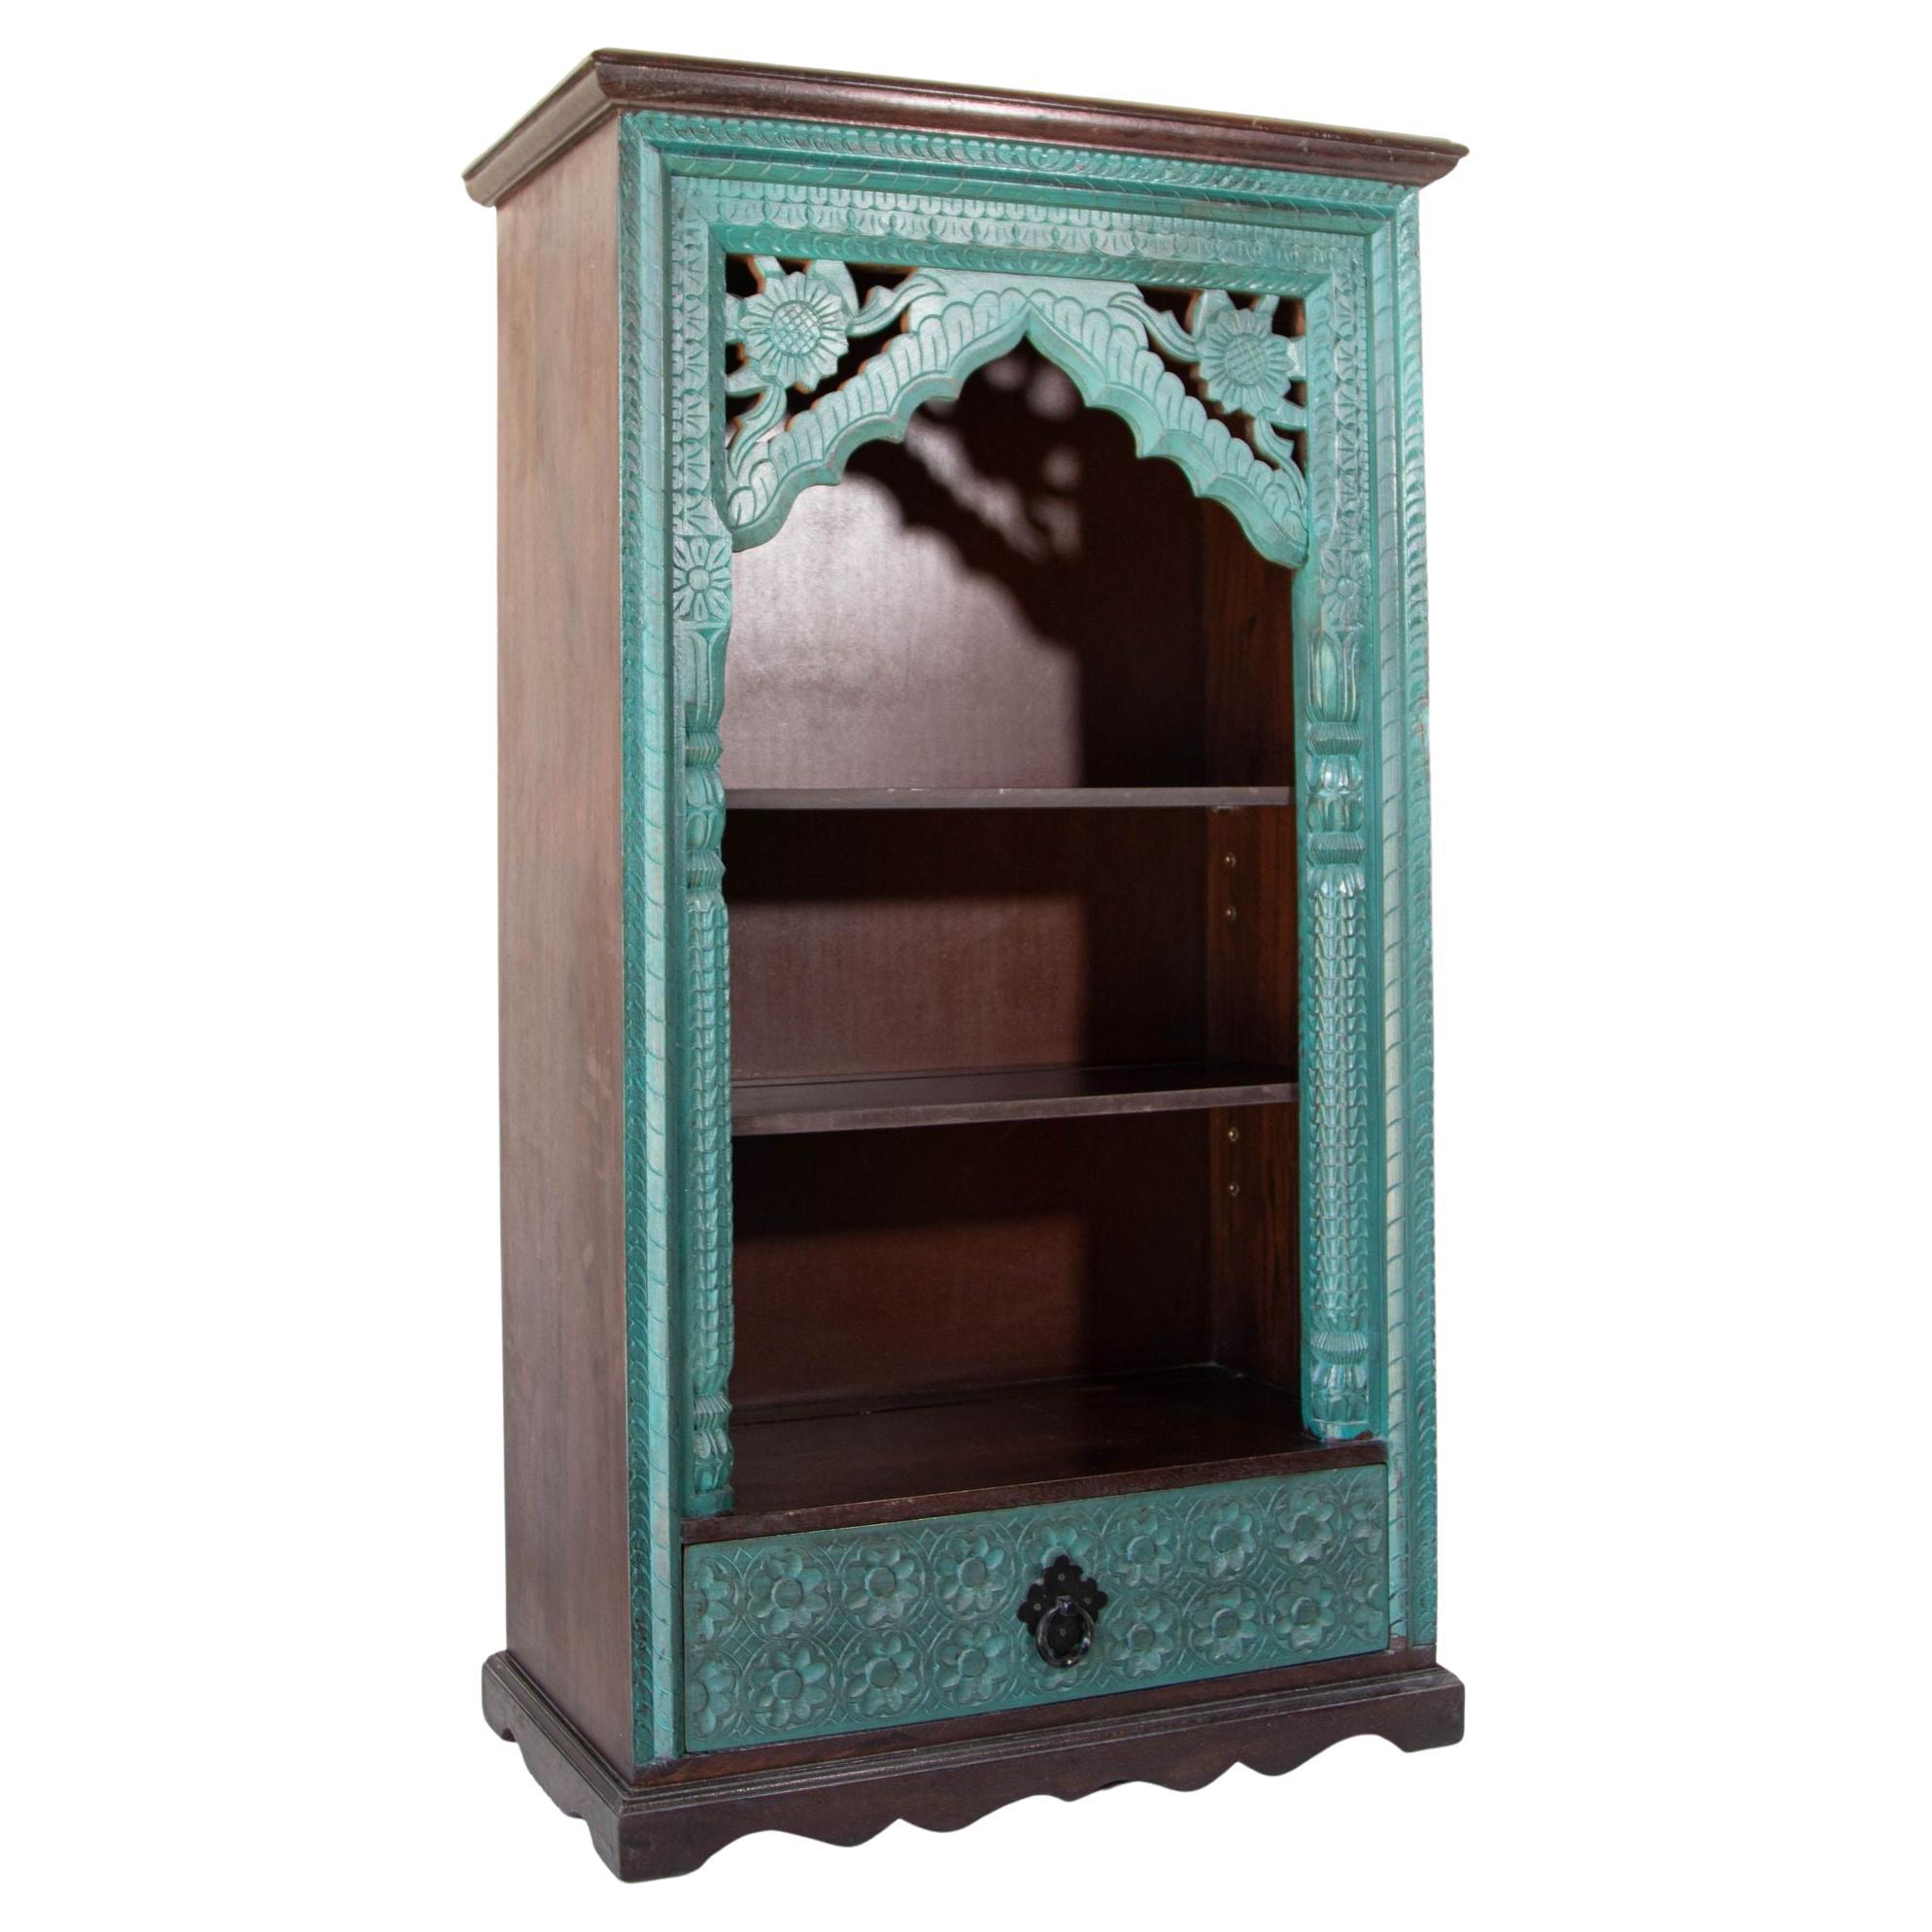 Hand-Carved Arch Bookshelf Wooden Cabinet in Rustic Blue